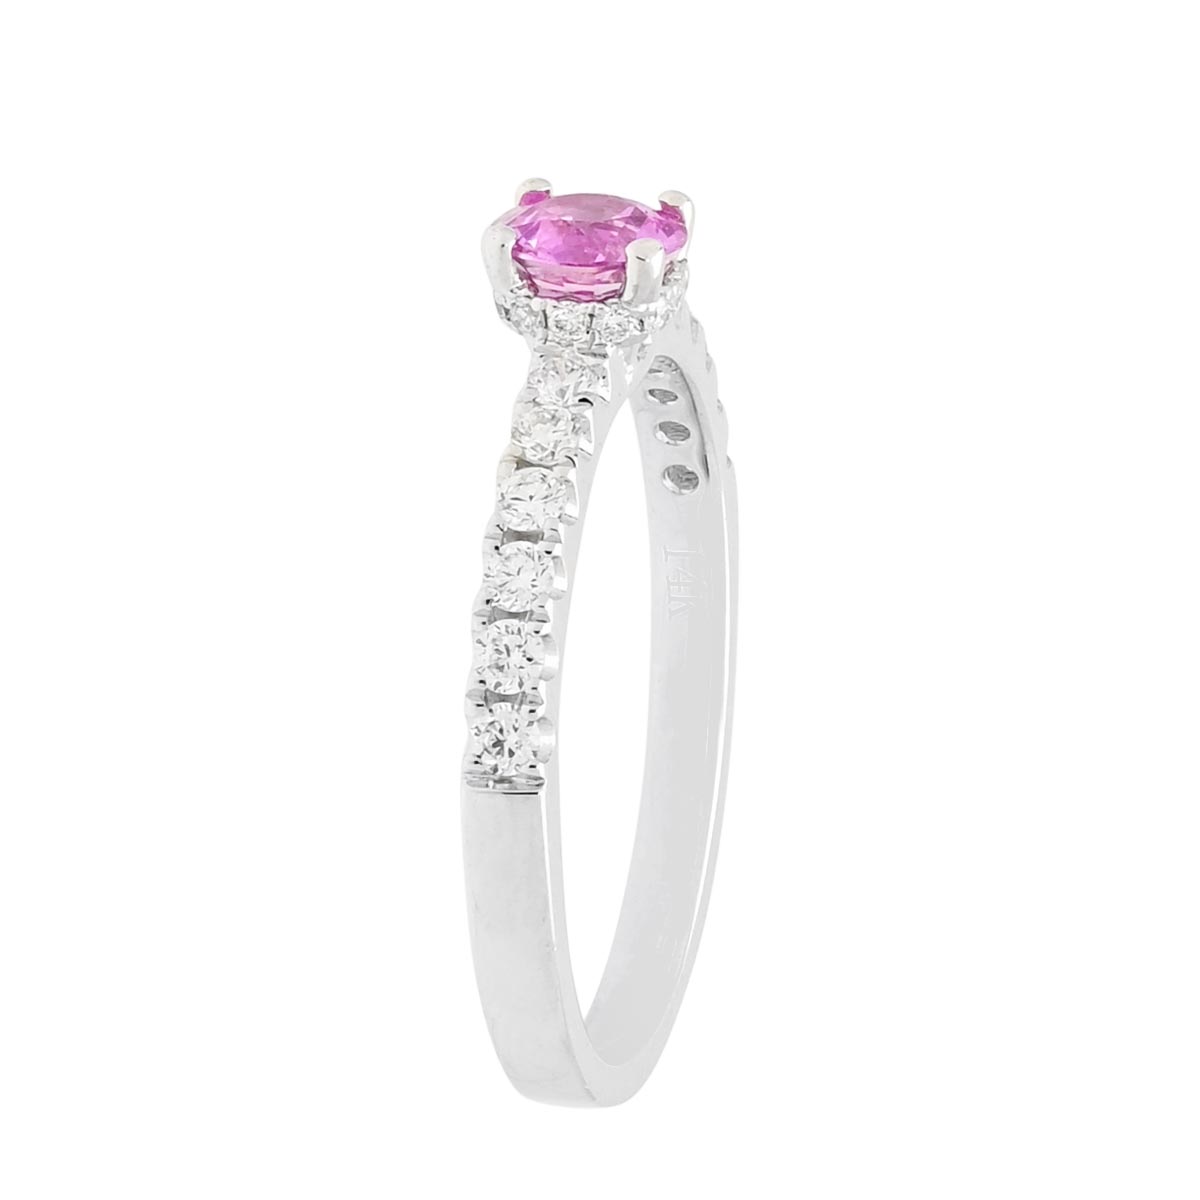 Pink Sapphire Ring in 14kt White Gold with Diamonds (1/3ct tw)